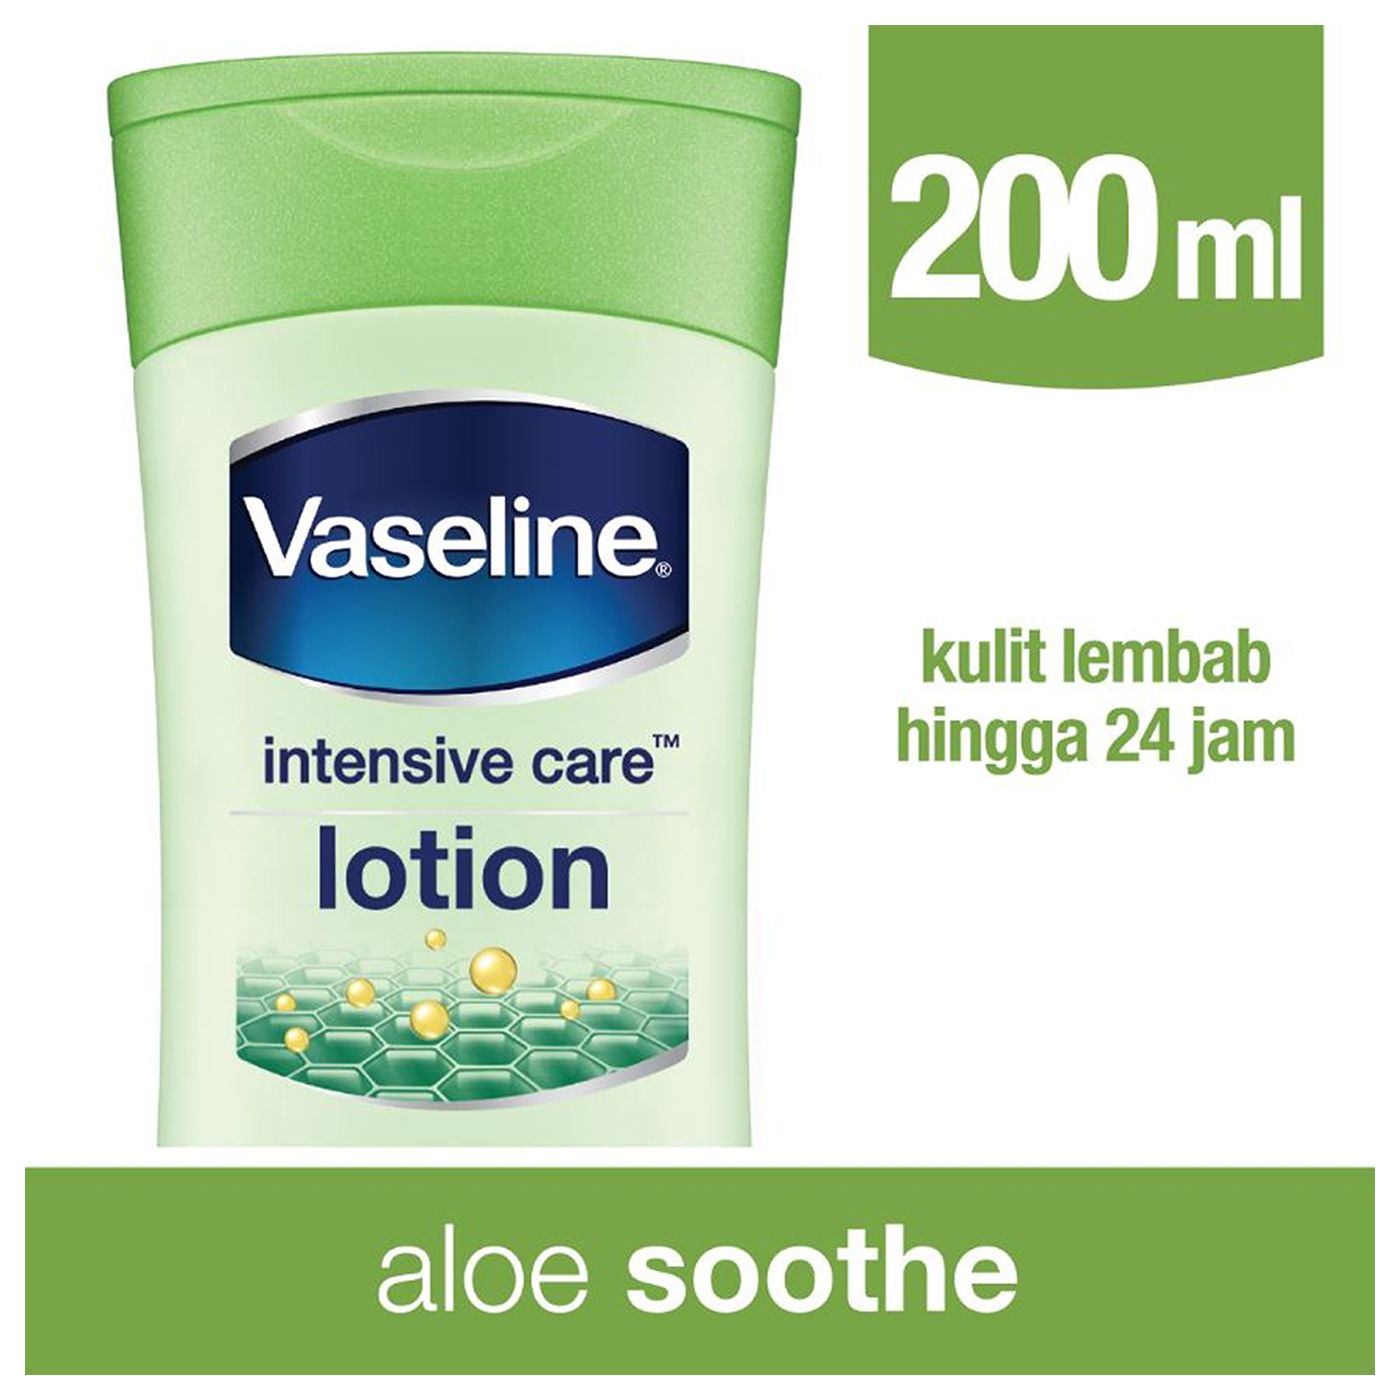 Vaseline Lotion Intensive Care Aloe Soothe 200ml - 1